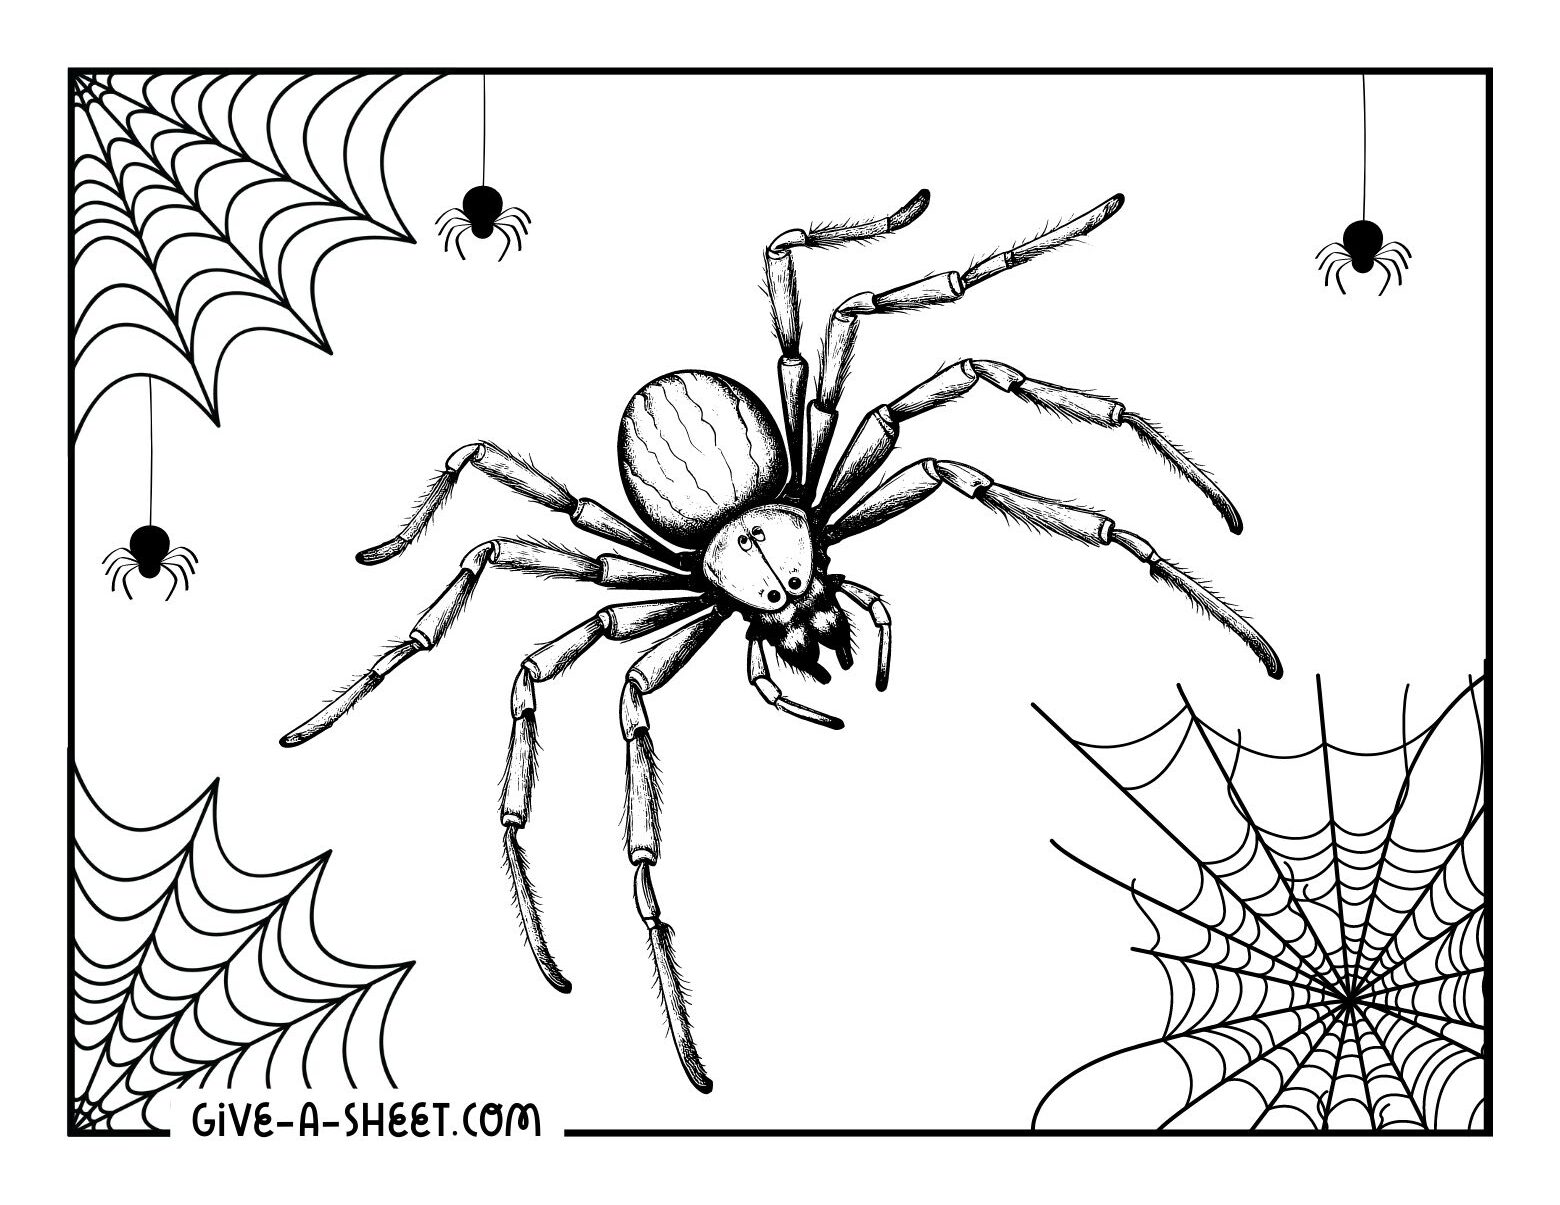 Tarantula animal coloring page isolated realistic designs.